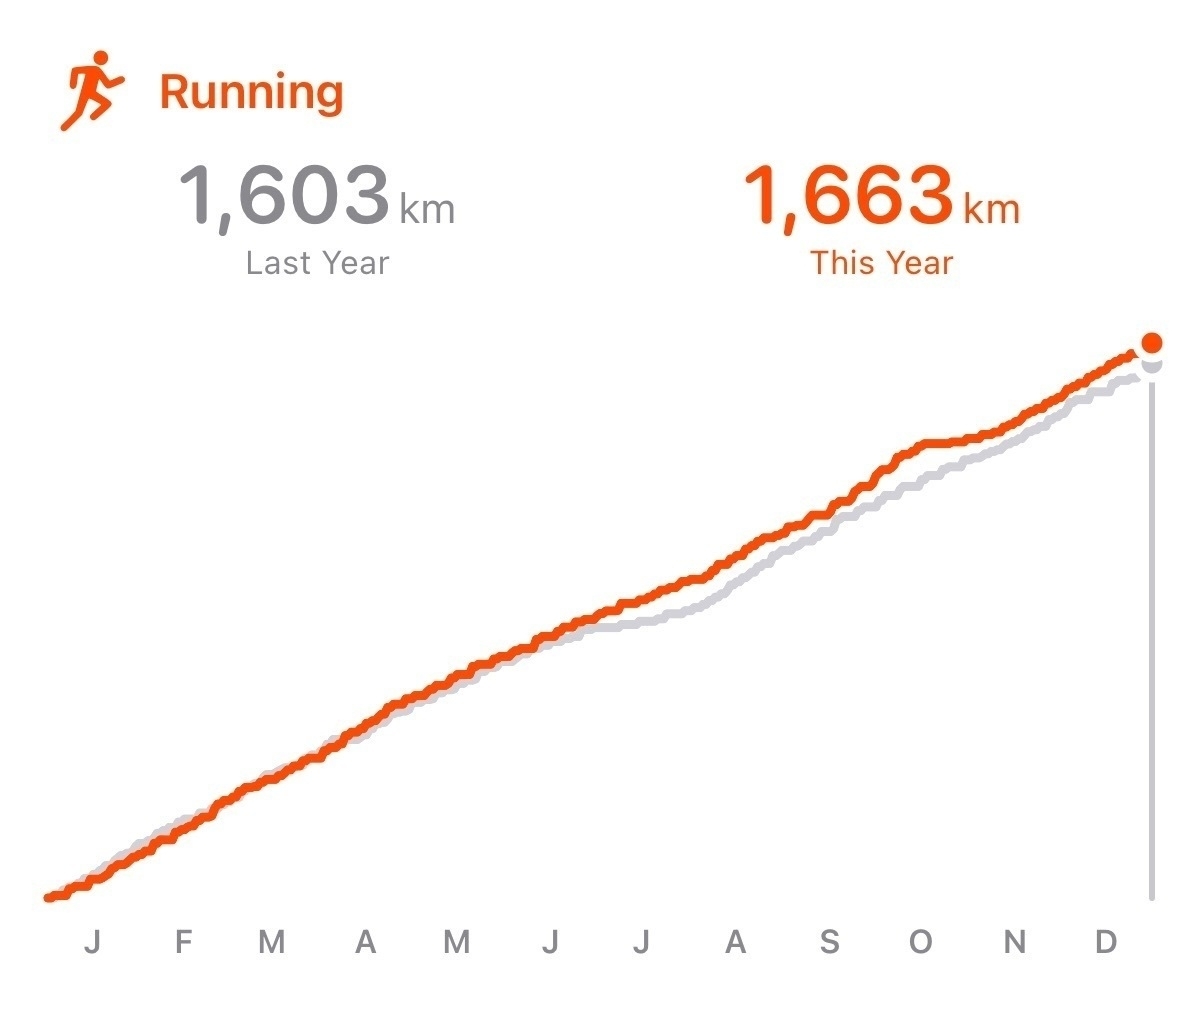 Cumulative running totals for 2023 (1,663 km) and 2022 (1,603 km)